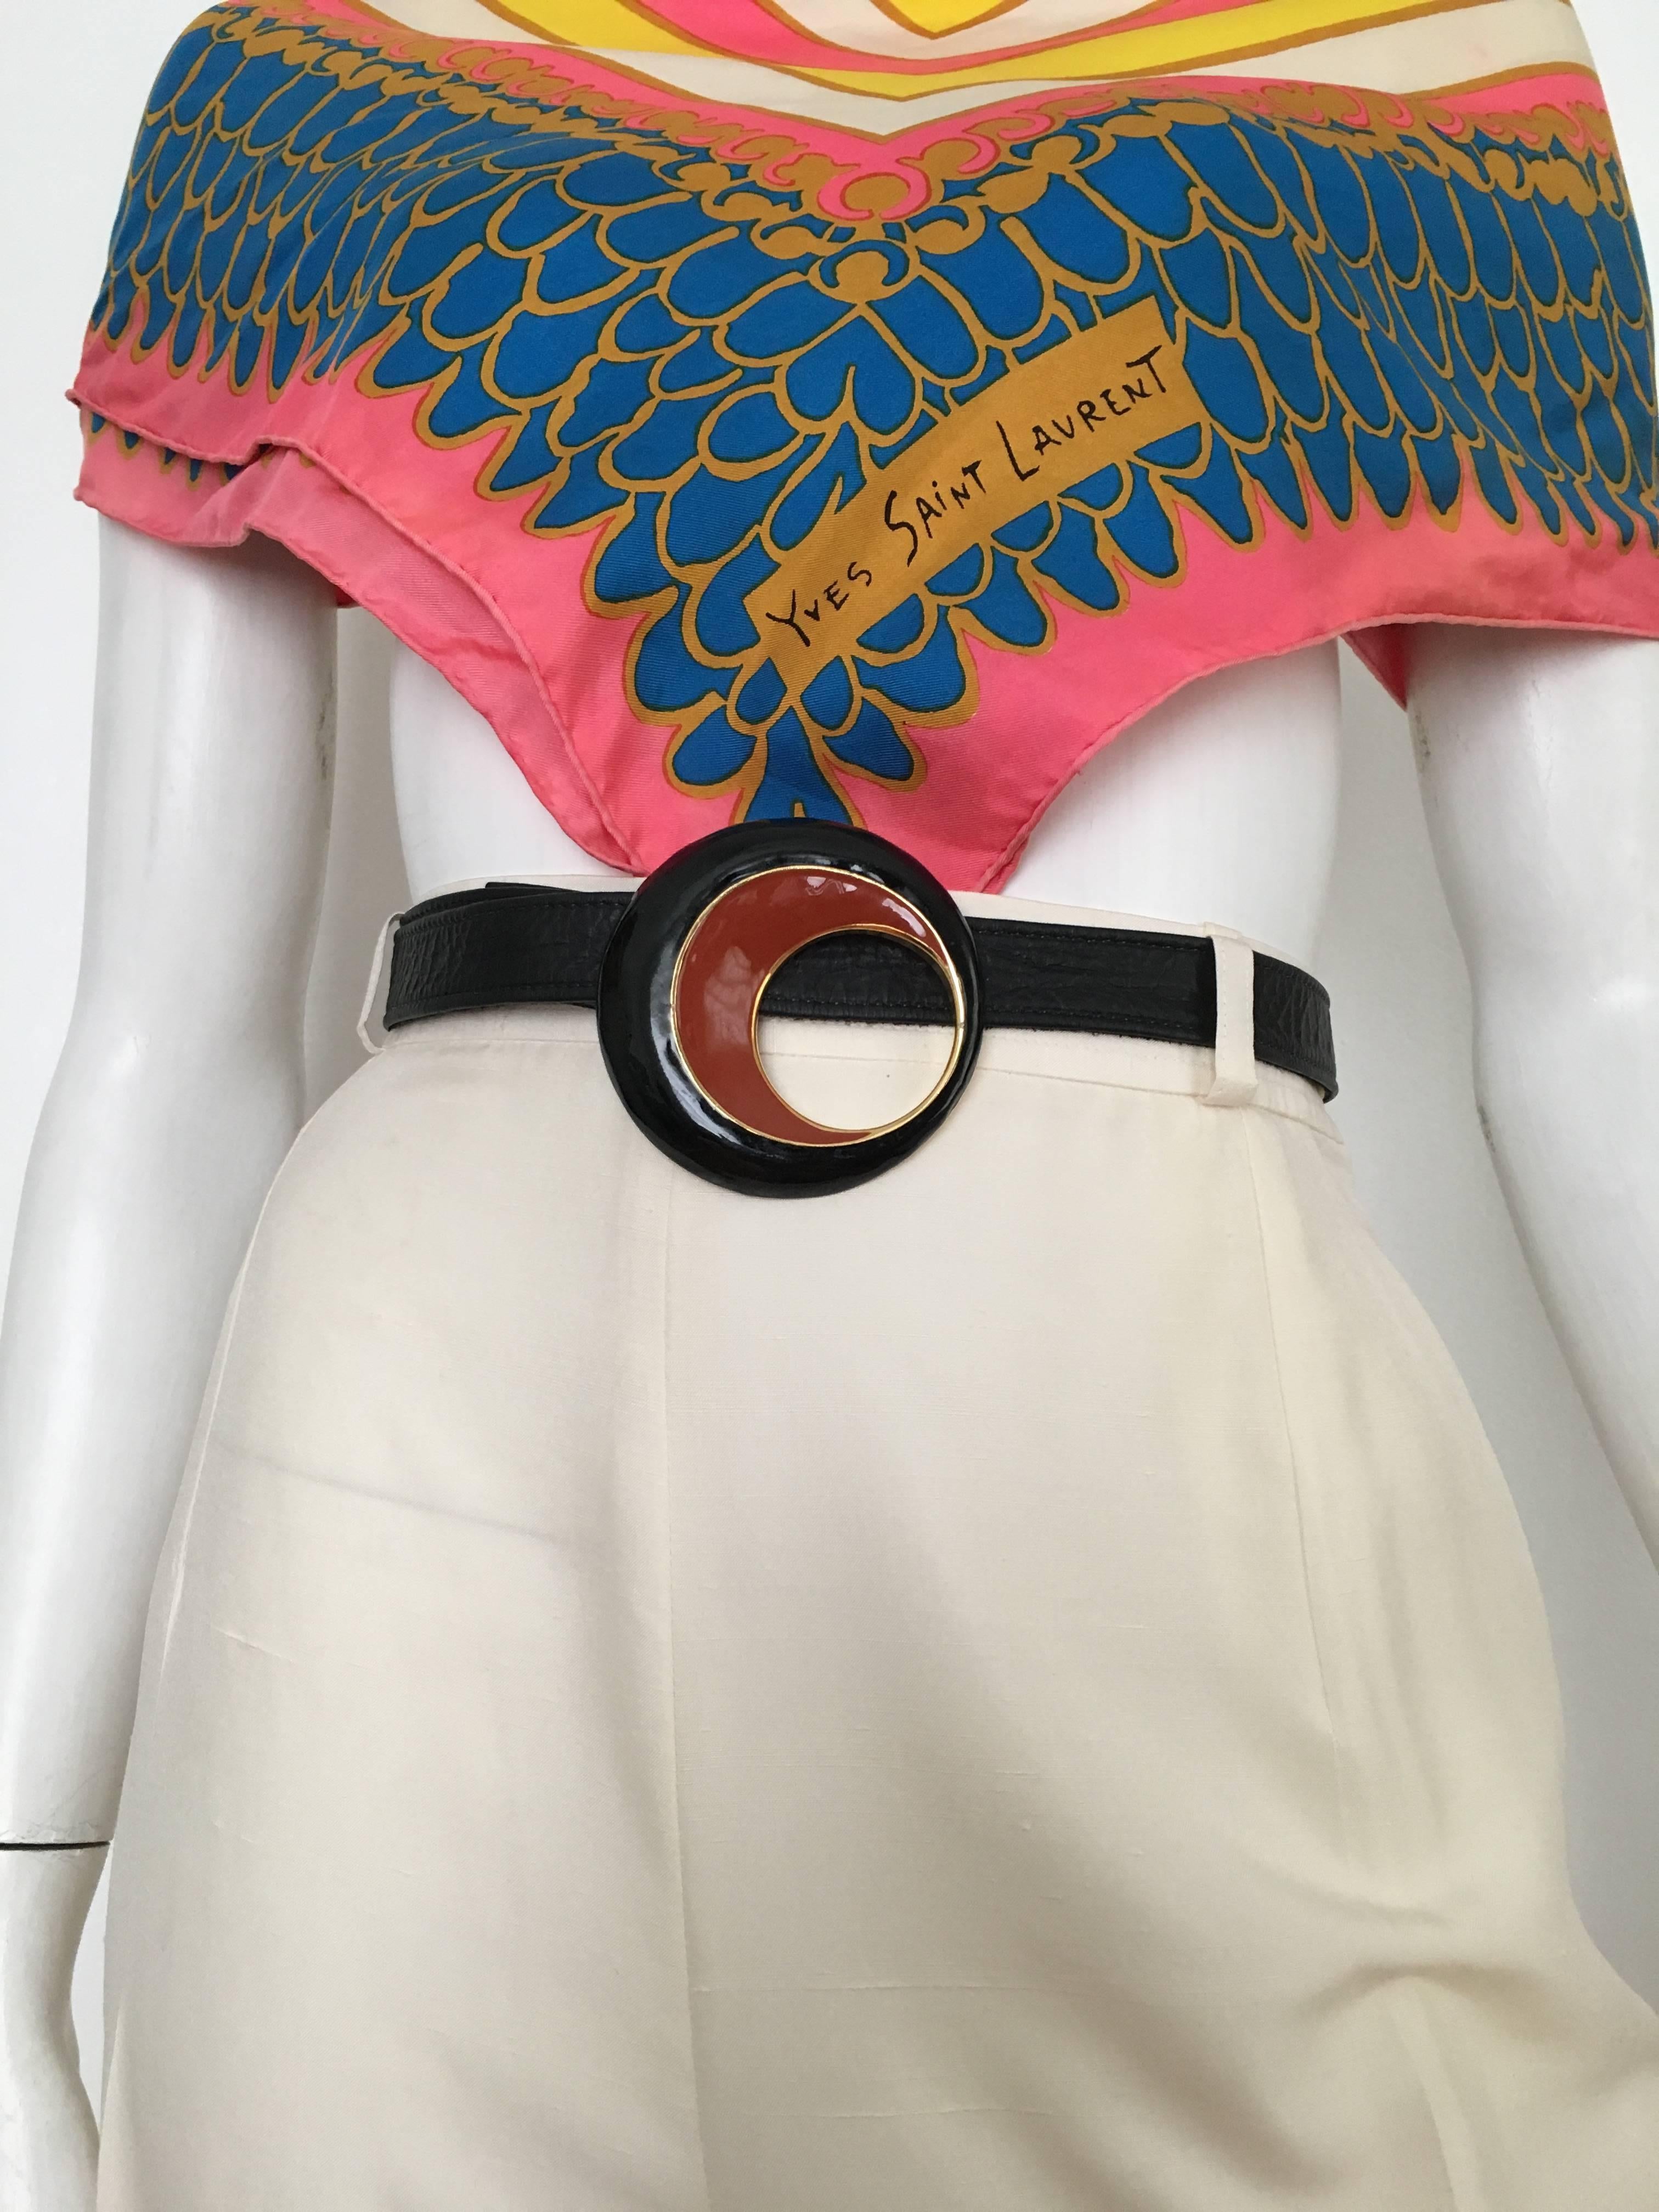 Alexis Kirk 1980s fabulous modern abstract black & rust buckle with black strap belt. There are multiple ways you can tie this belt strap and just look fabulously CHIC. Alexis Kirk studied art under Walter Gropius at Harvard University, and also